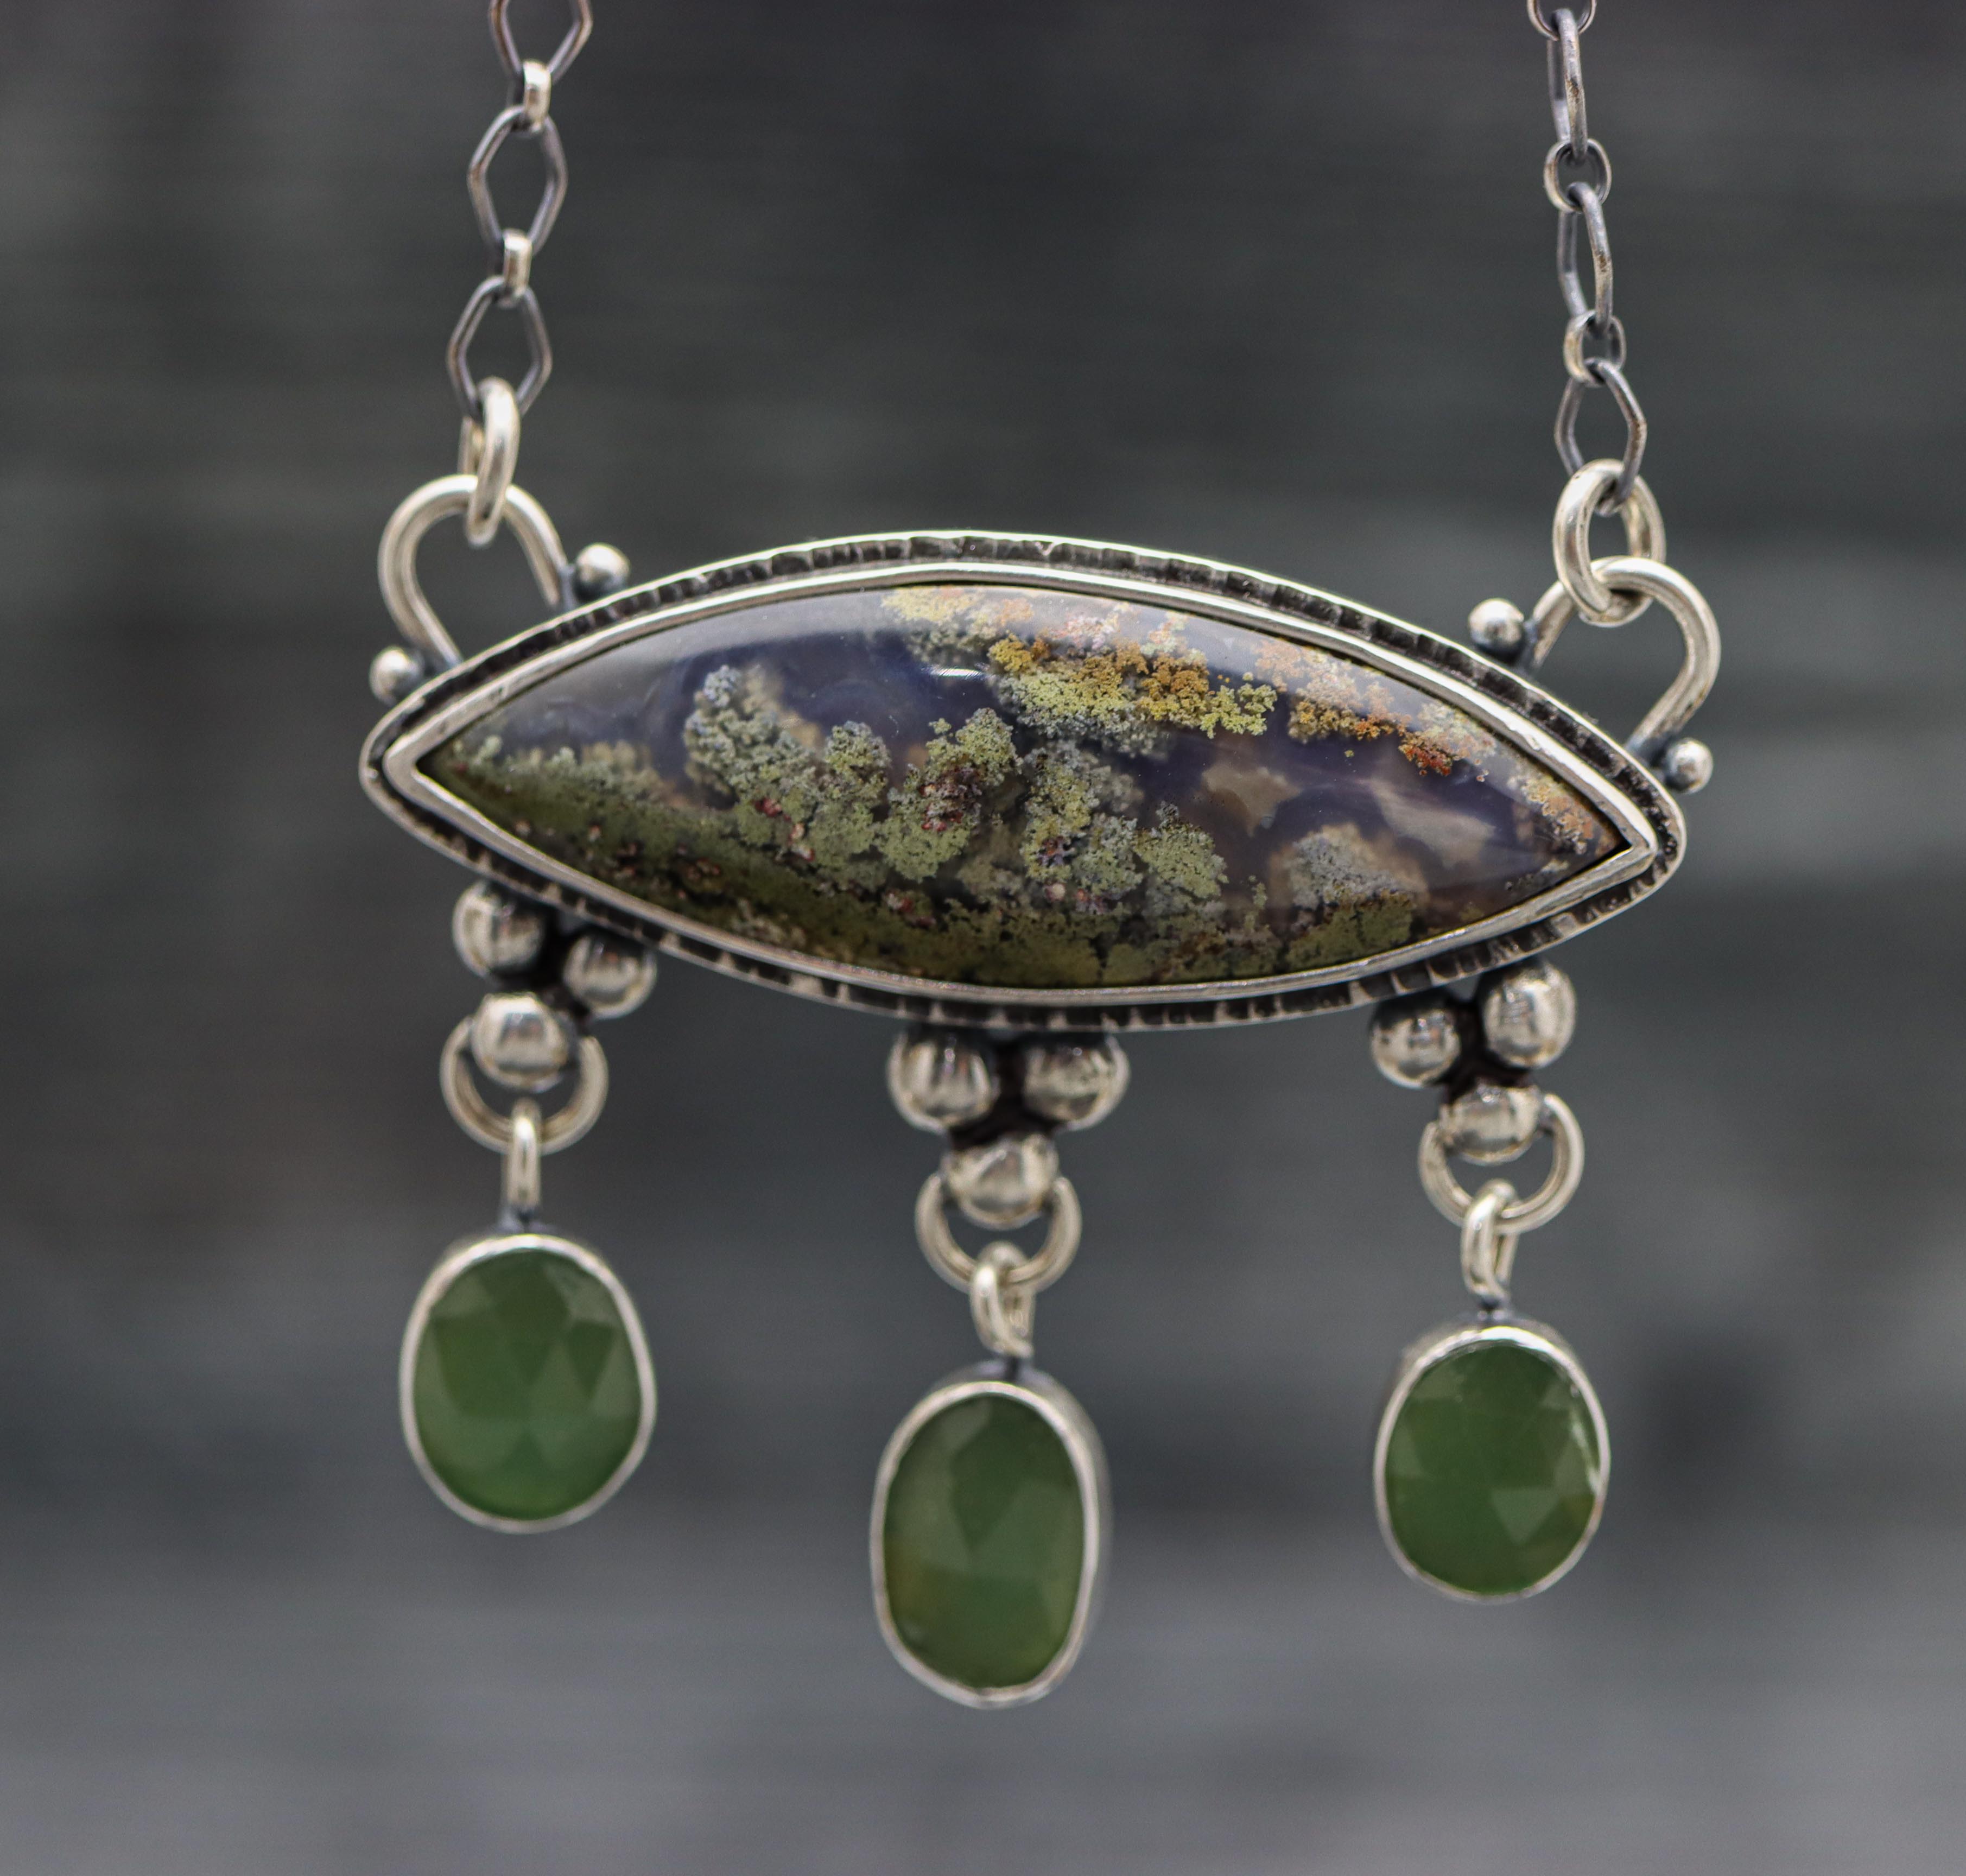 Moss Agate and Aventurine Pendant Sterling Silver One Of a Kind Gemstone Necklace